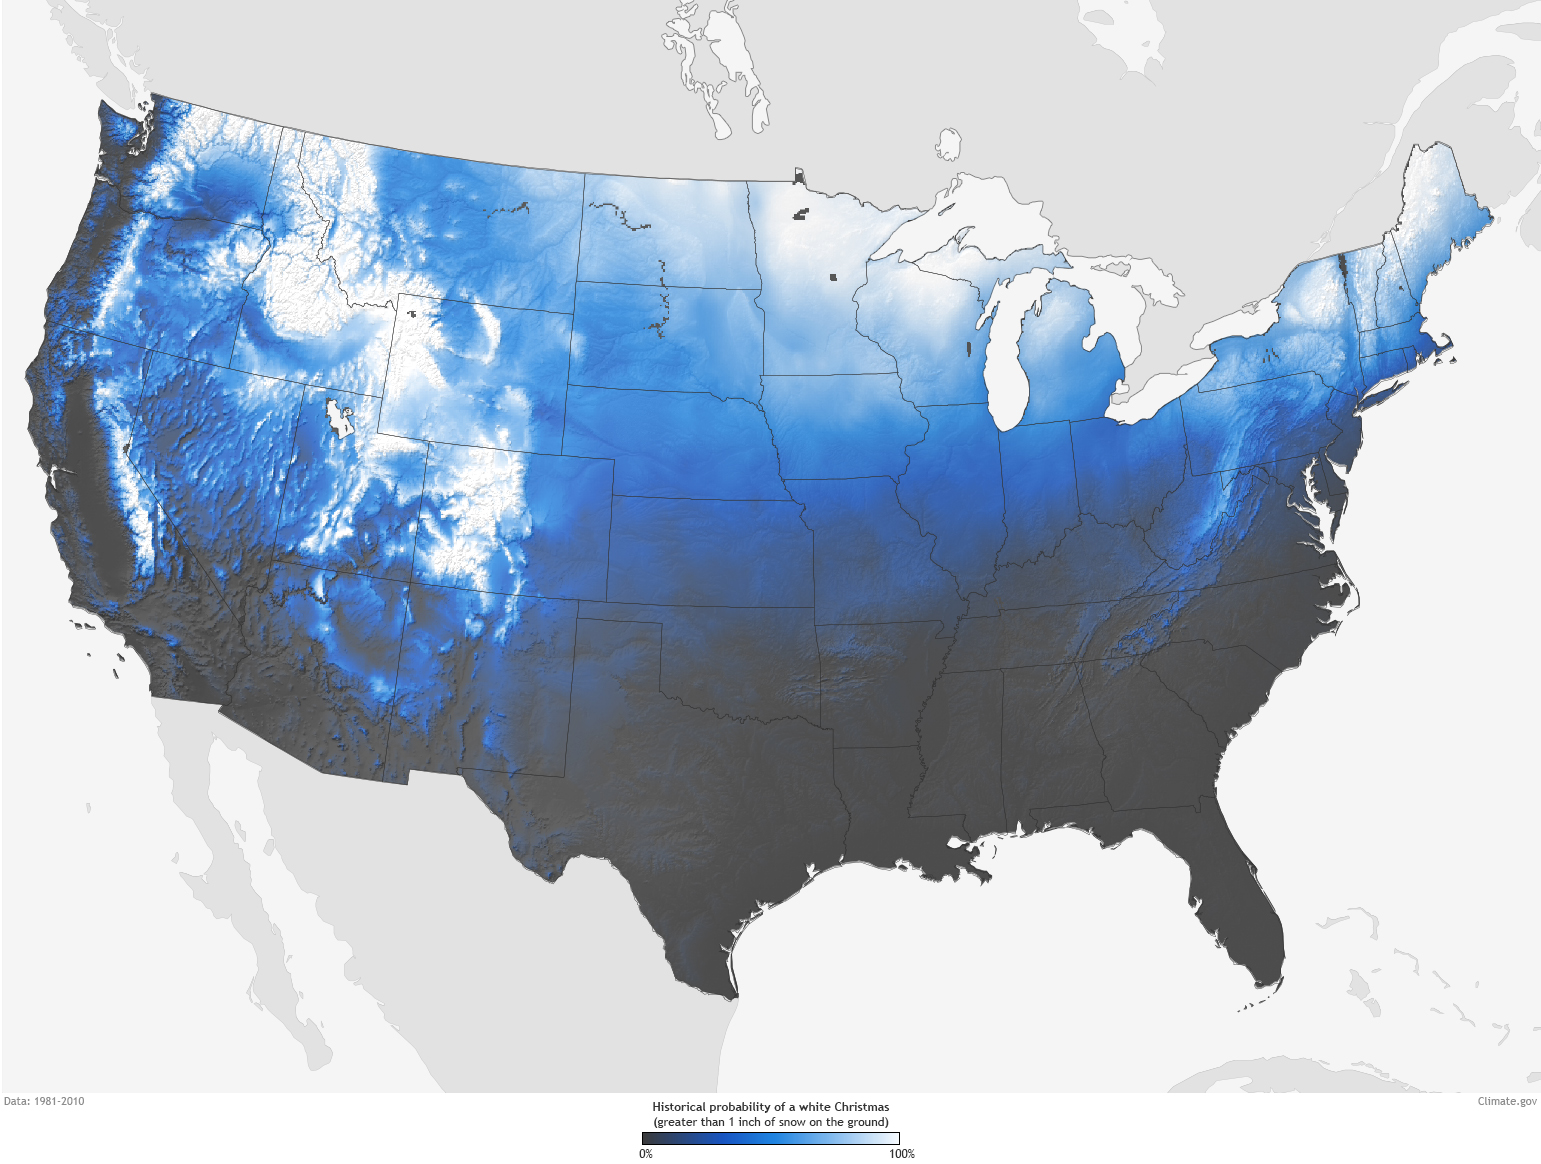 Climatology of Seeing a White Christmas